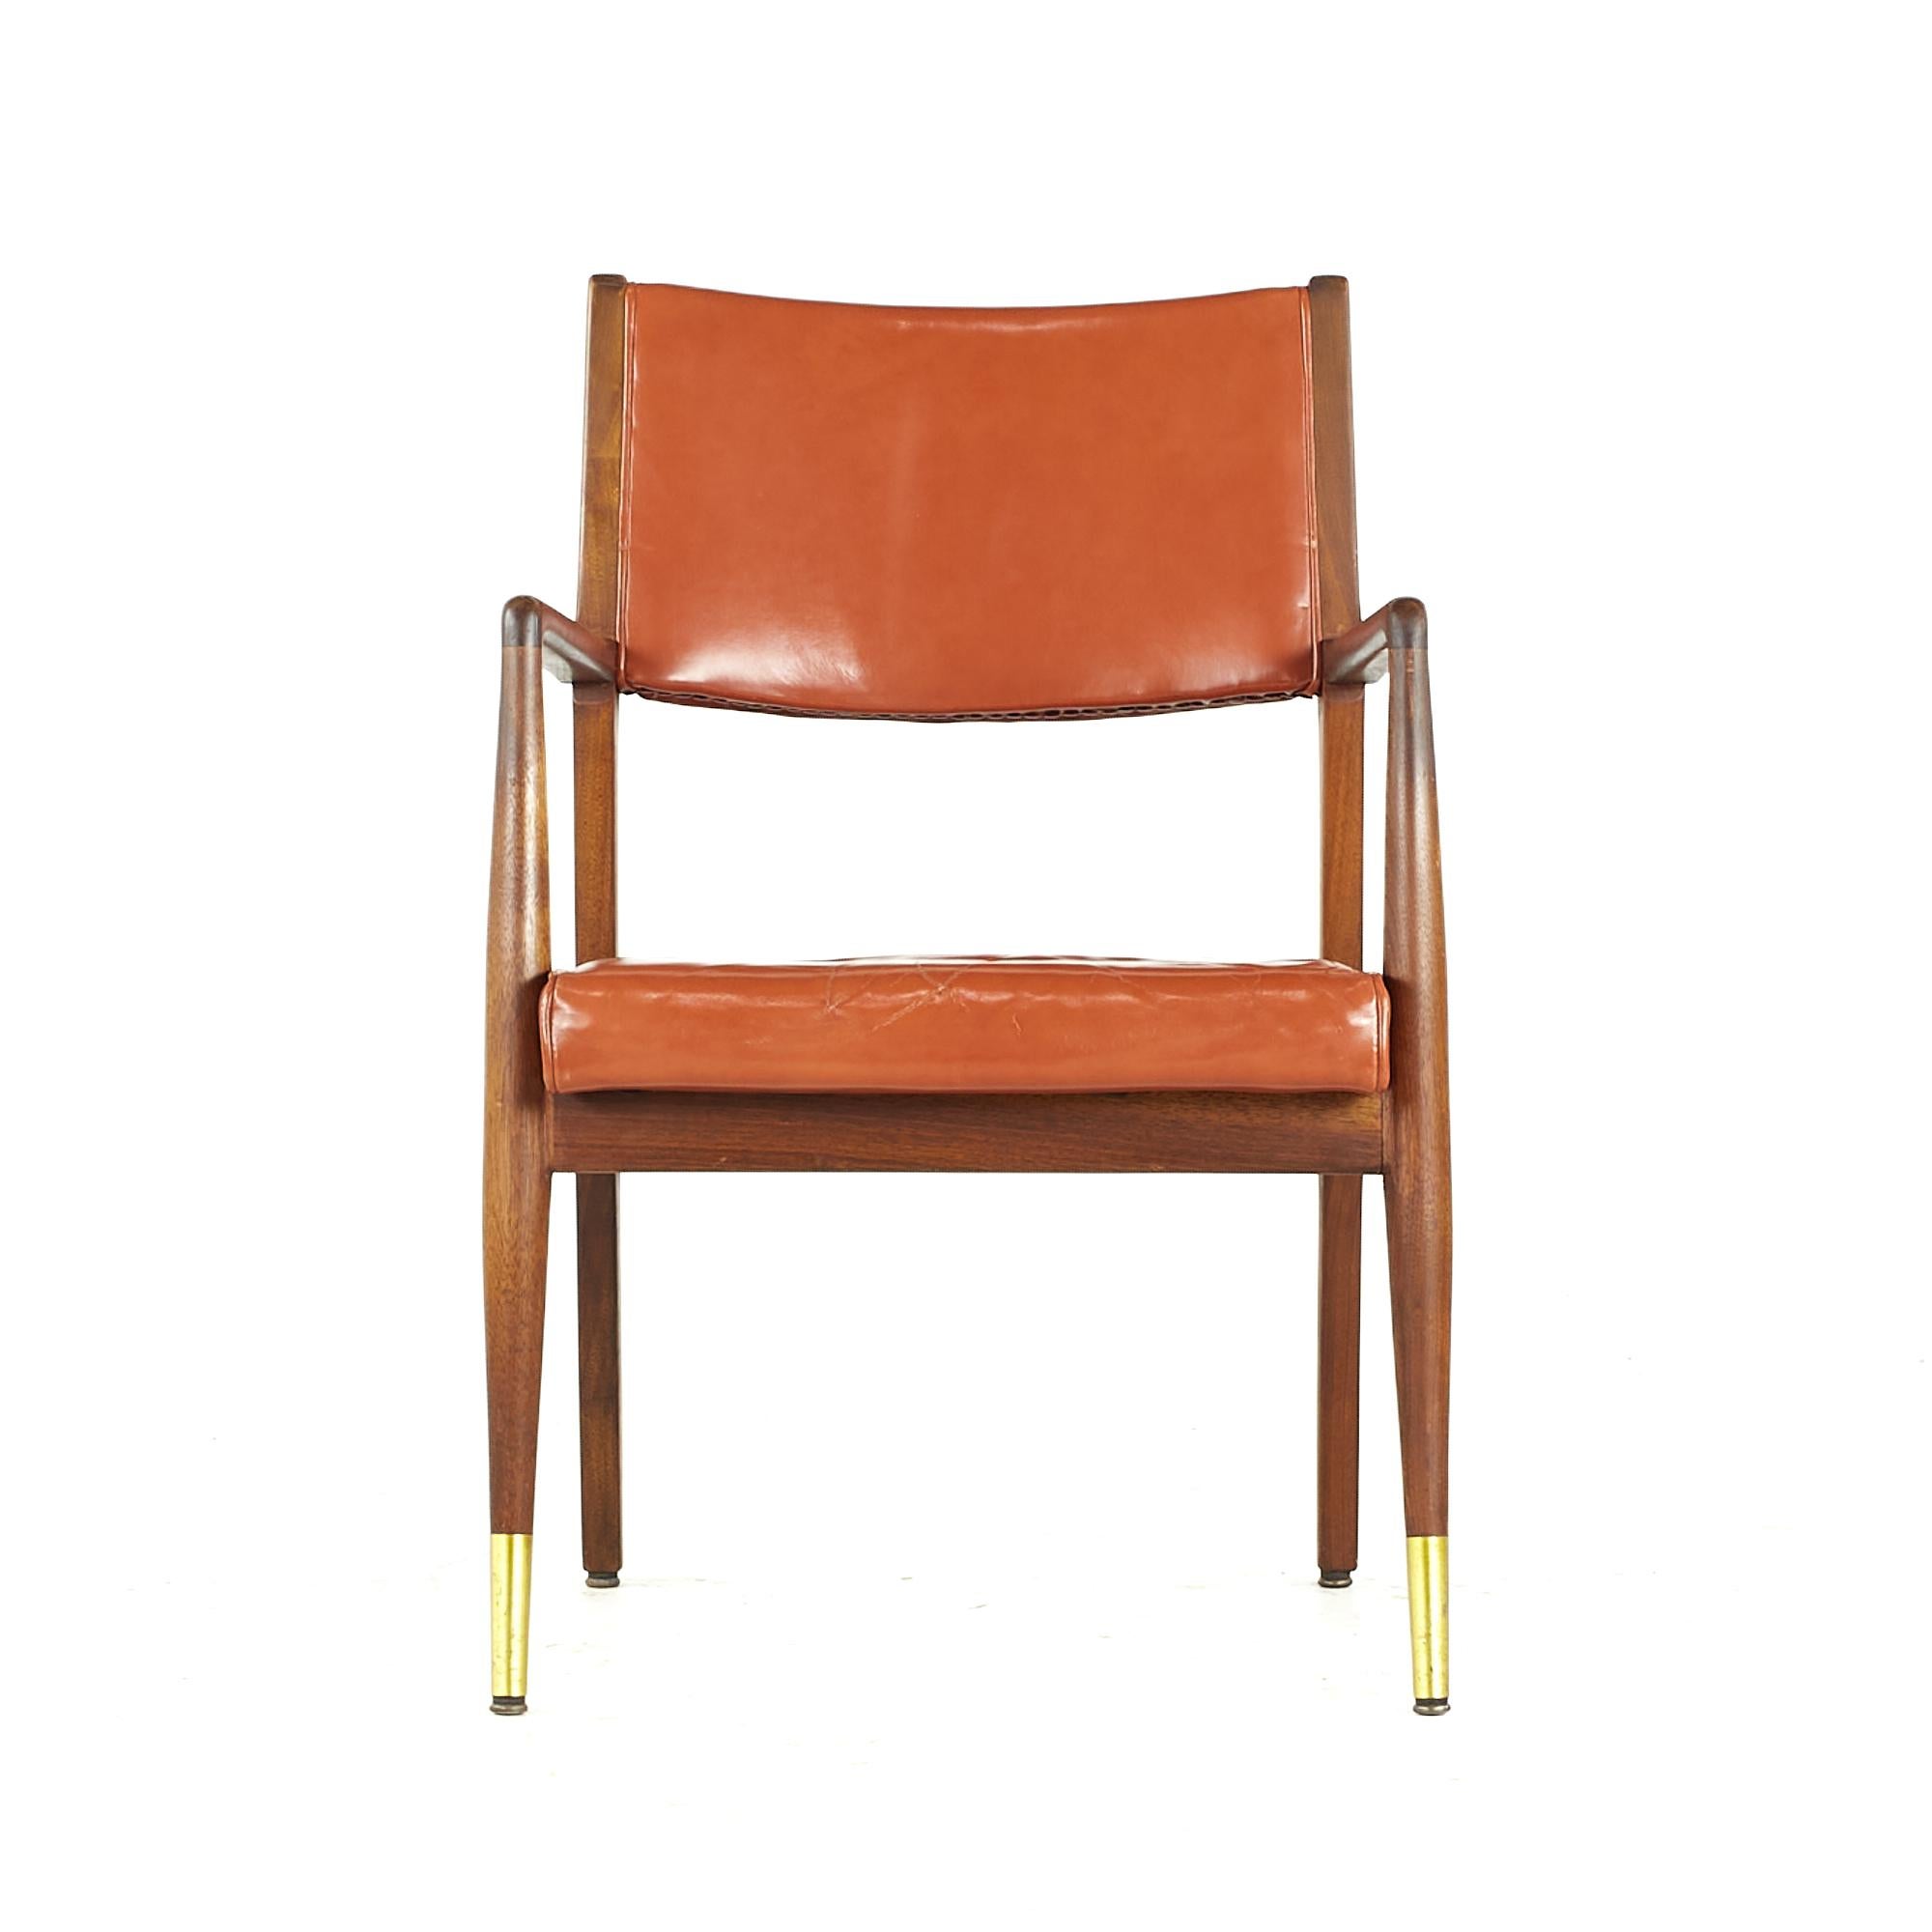 Stow Davis midcentury Walnut and Brass Lounge Chair.
Each chair measures: 22 wide x 24 deep x 34.25 inches high, with a seat height of 17.75 and arm height/chair clearance of 26.25 inches.
All pieces of furniture can be had in what we call restored